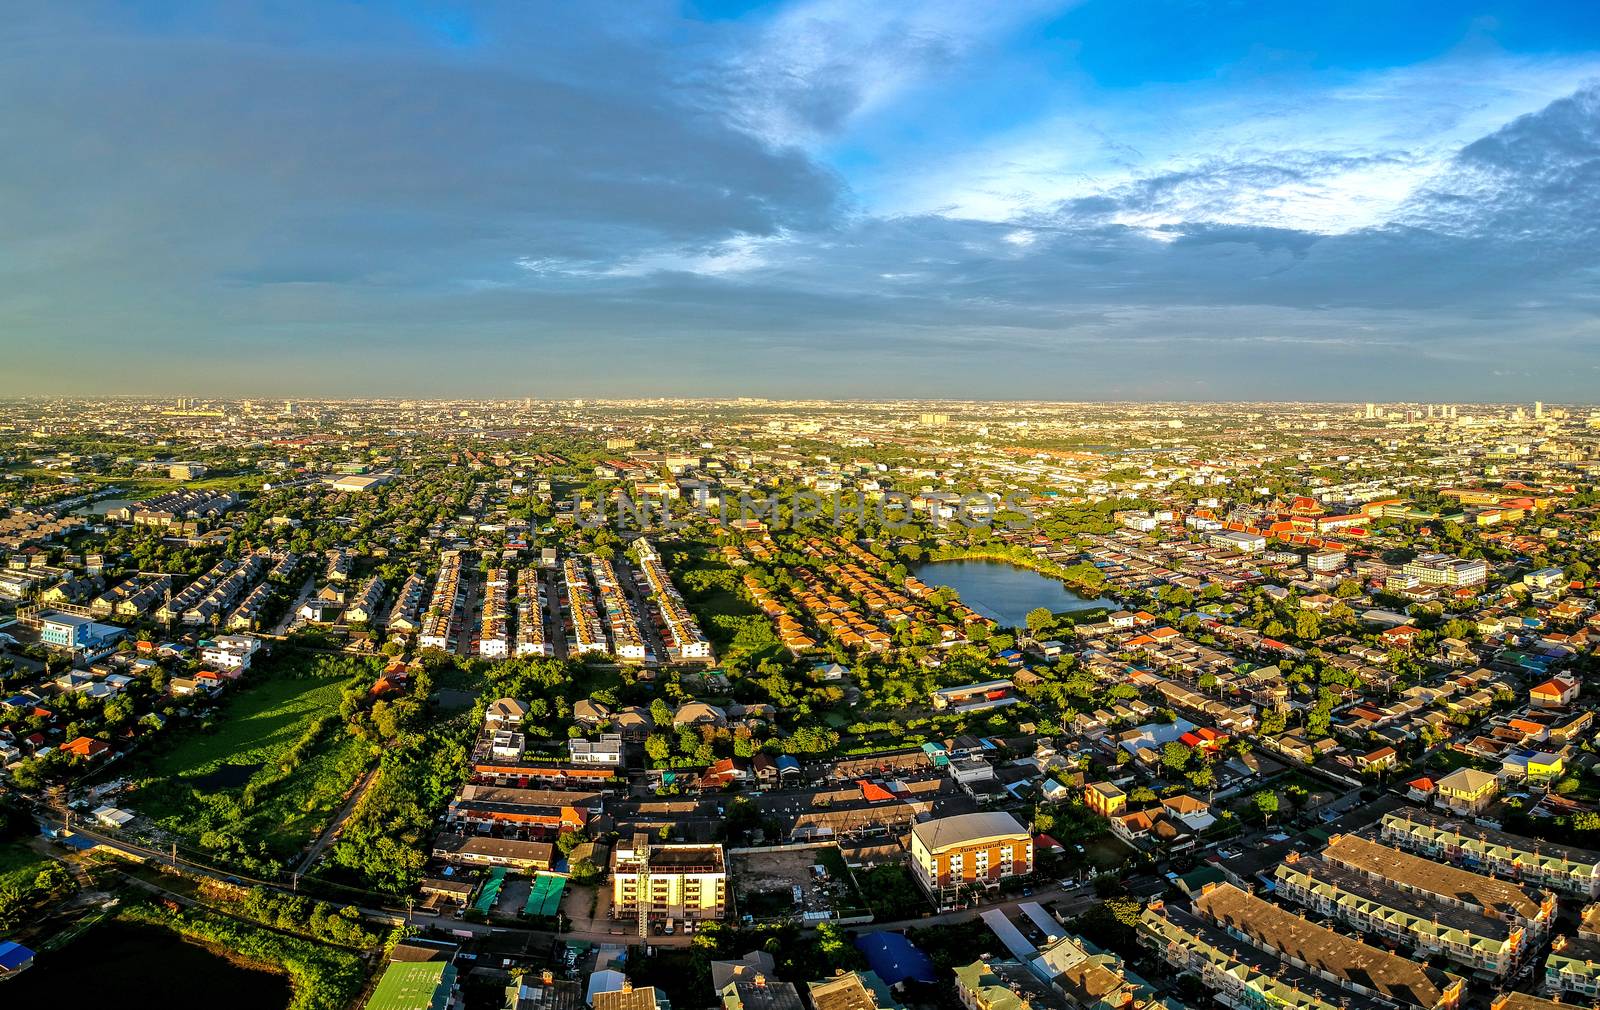 Panorama view of bangkok city Thailand in Aerial view at evening light, Bangkok is the capital and most populous city of Thailand.